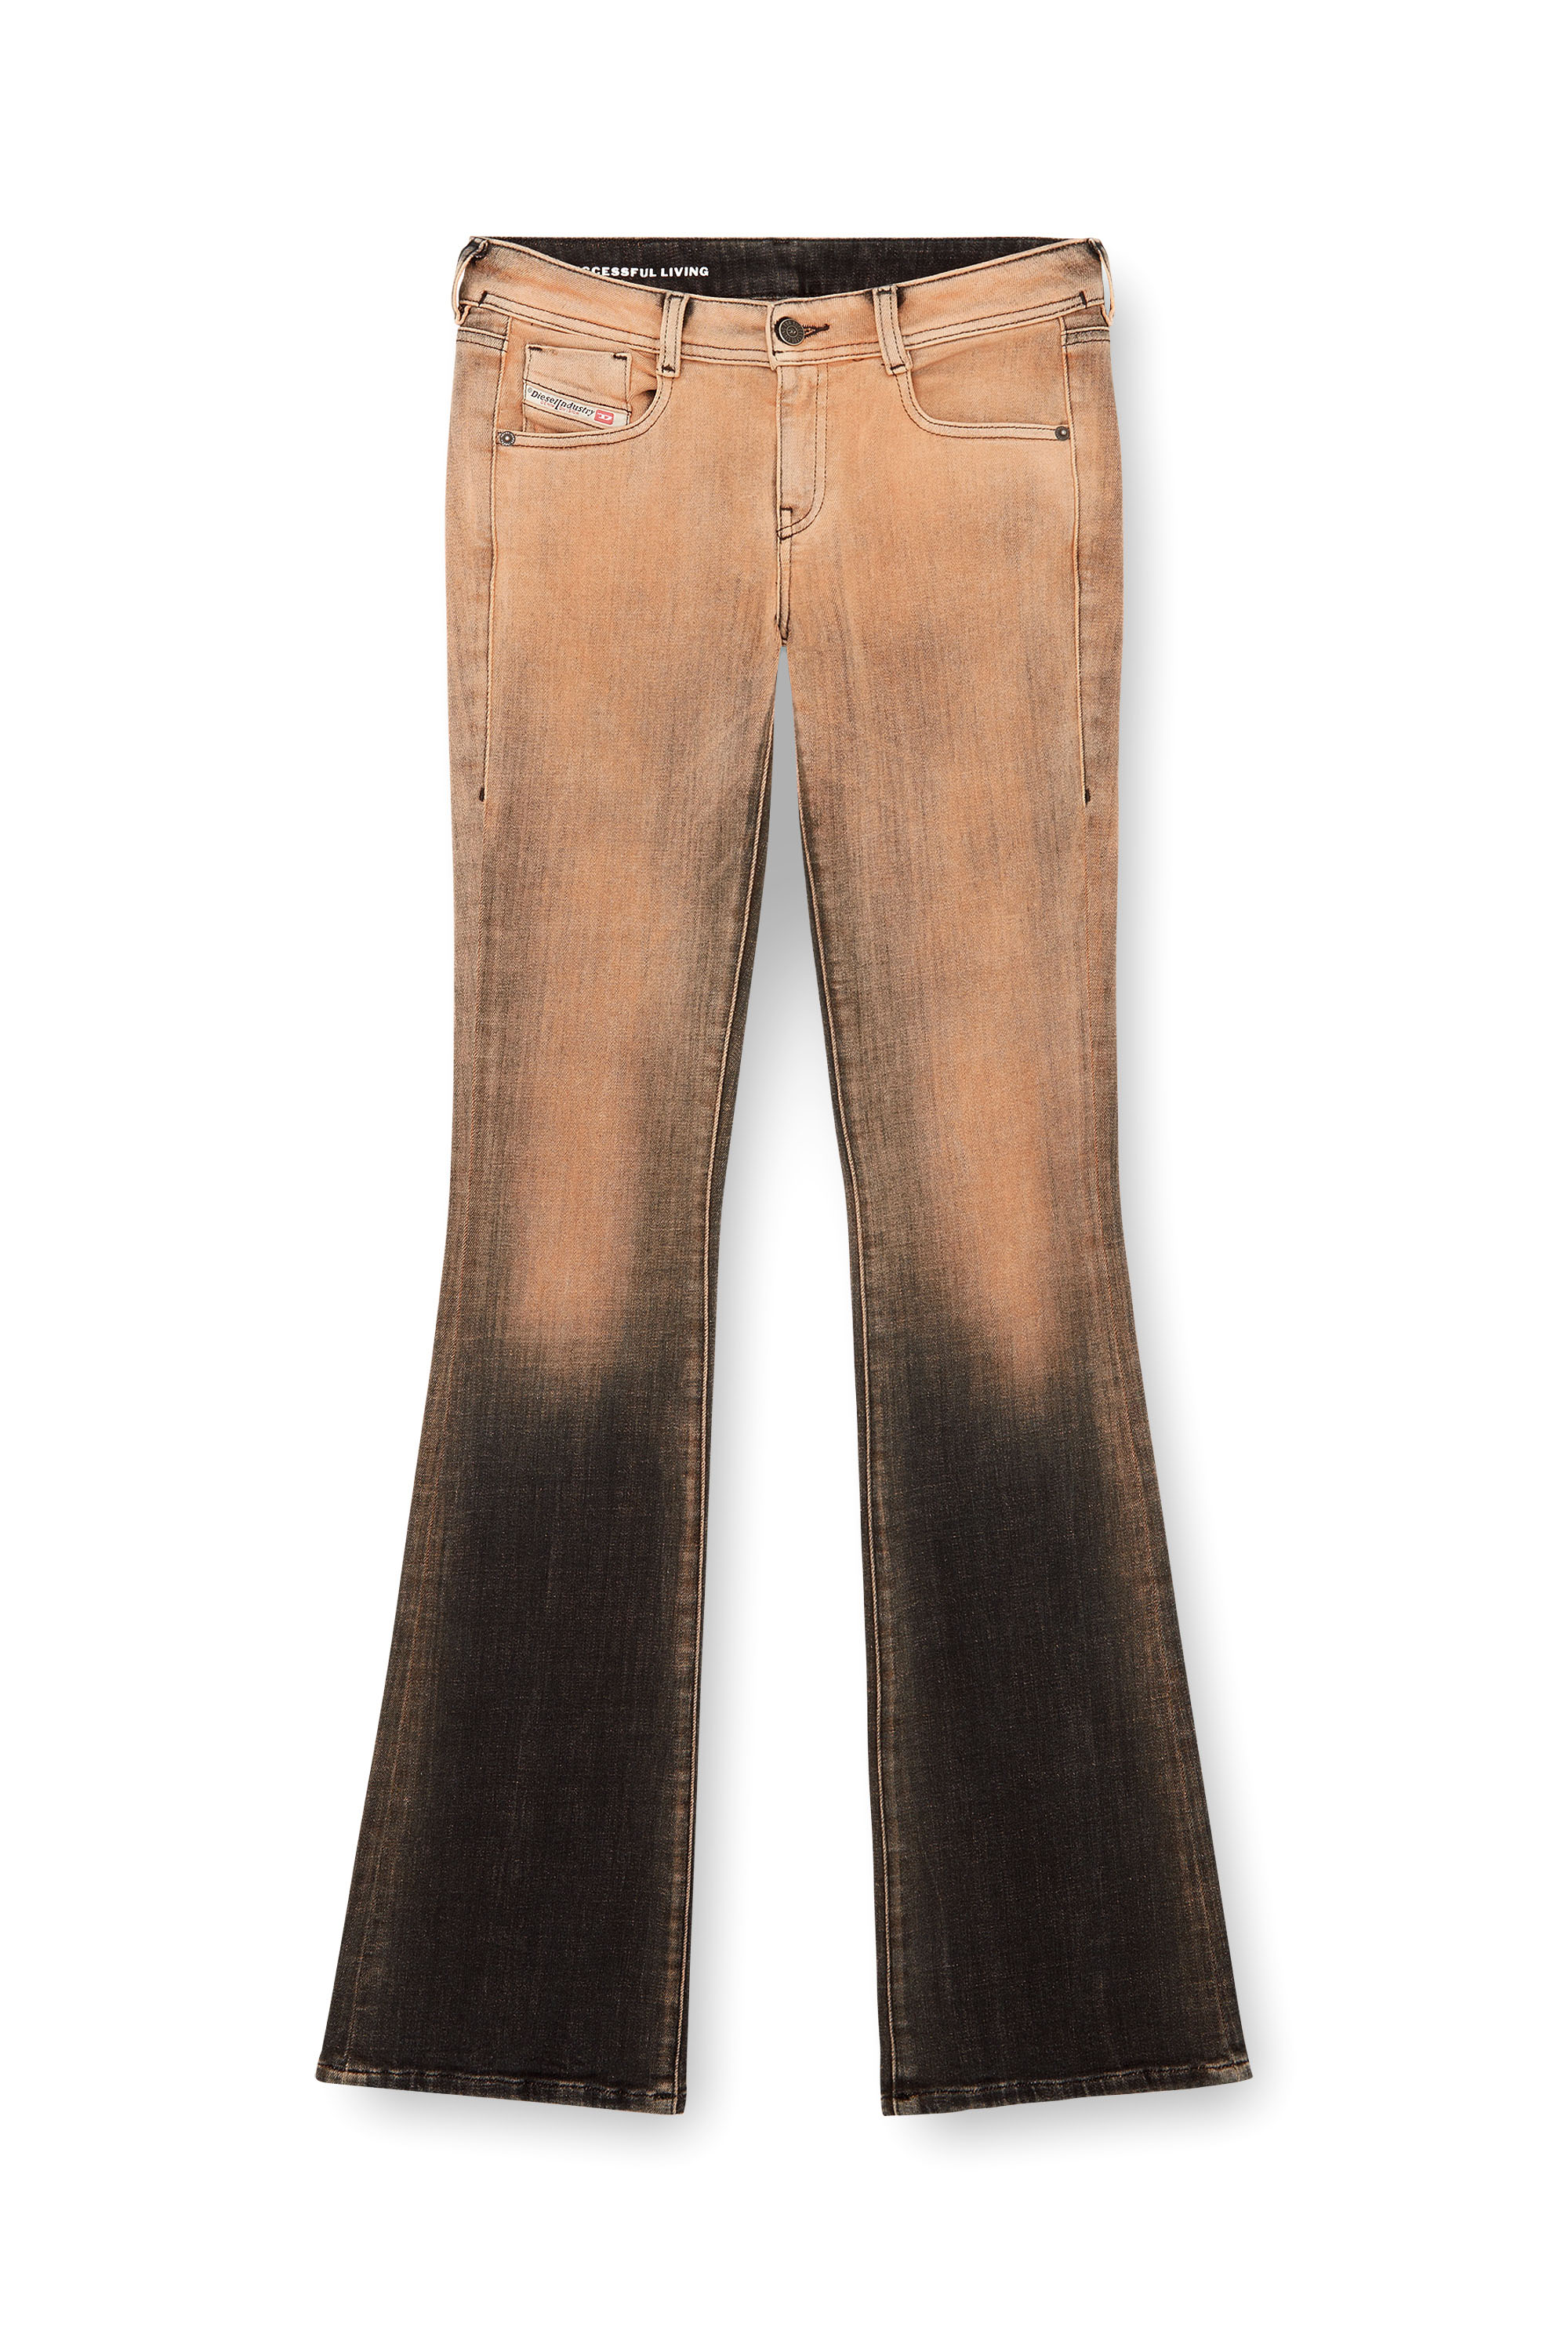 Diesel - Bootcut and Flare Jeans 1969 D-Ebbey 09K12, Mujer Bootcut y Flare Jeans - 1969 D-Ebbey in Multicolor - Image 5